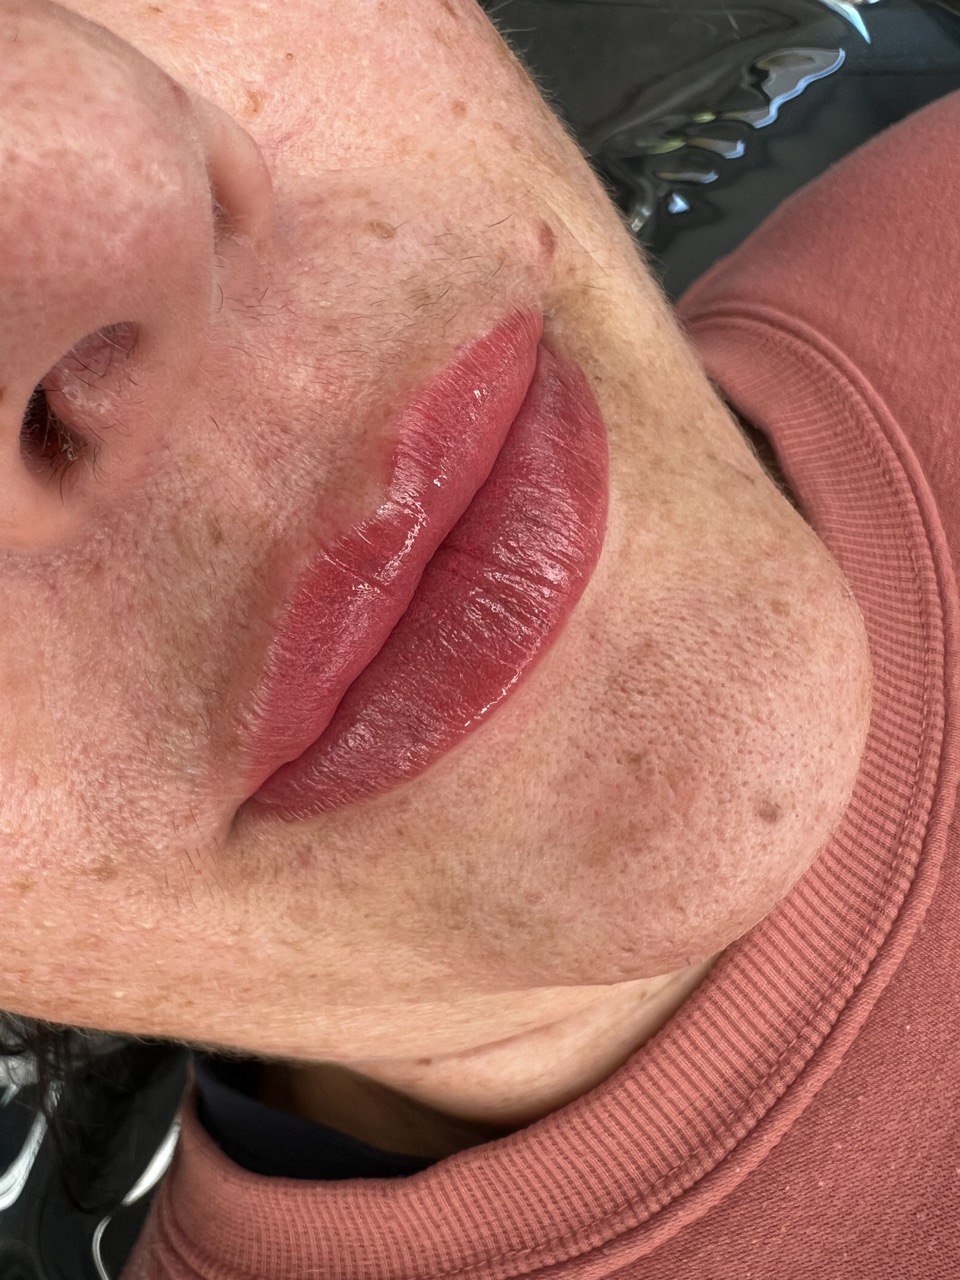 Lipstic Cosmetic Tattoo. Cosmetic and Mediical Tattoo by Dasha. Permanent makeup and reconstructive tattoo, scalp micro-pigmentation in Christchurch, New Zealand